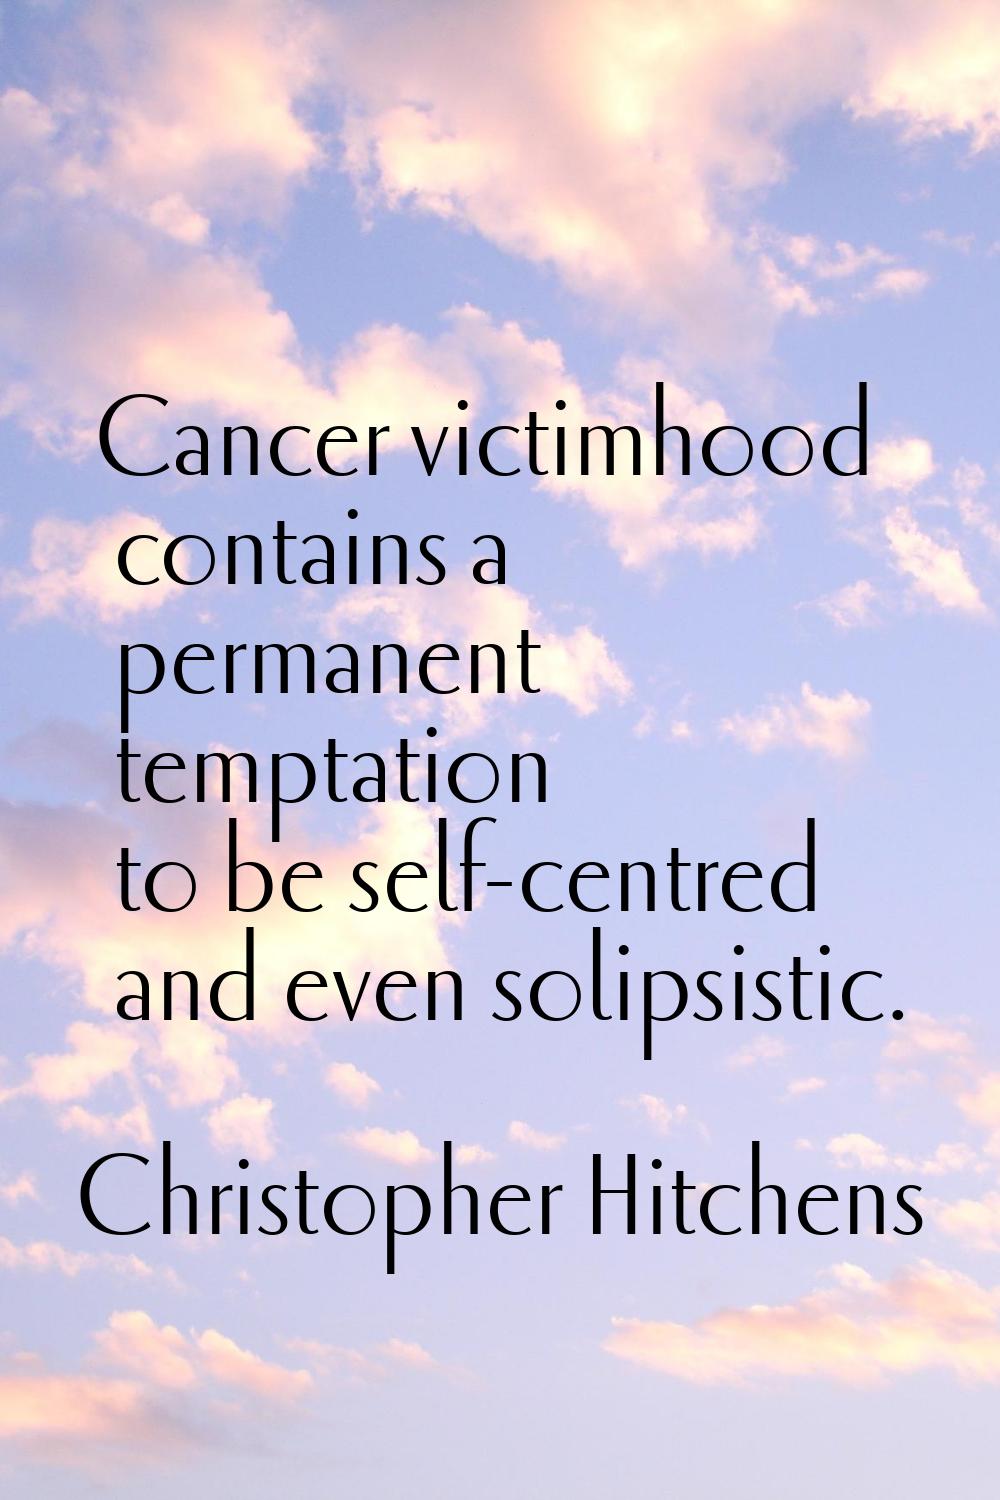 Cancer victimhood contains a permanent temptation to be self-centred and even solipsistic.